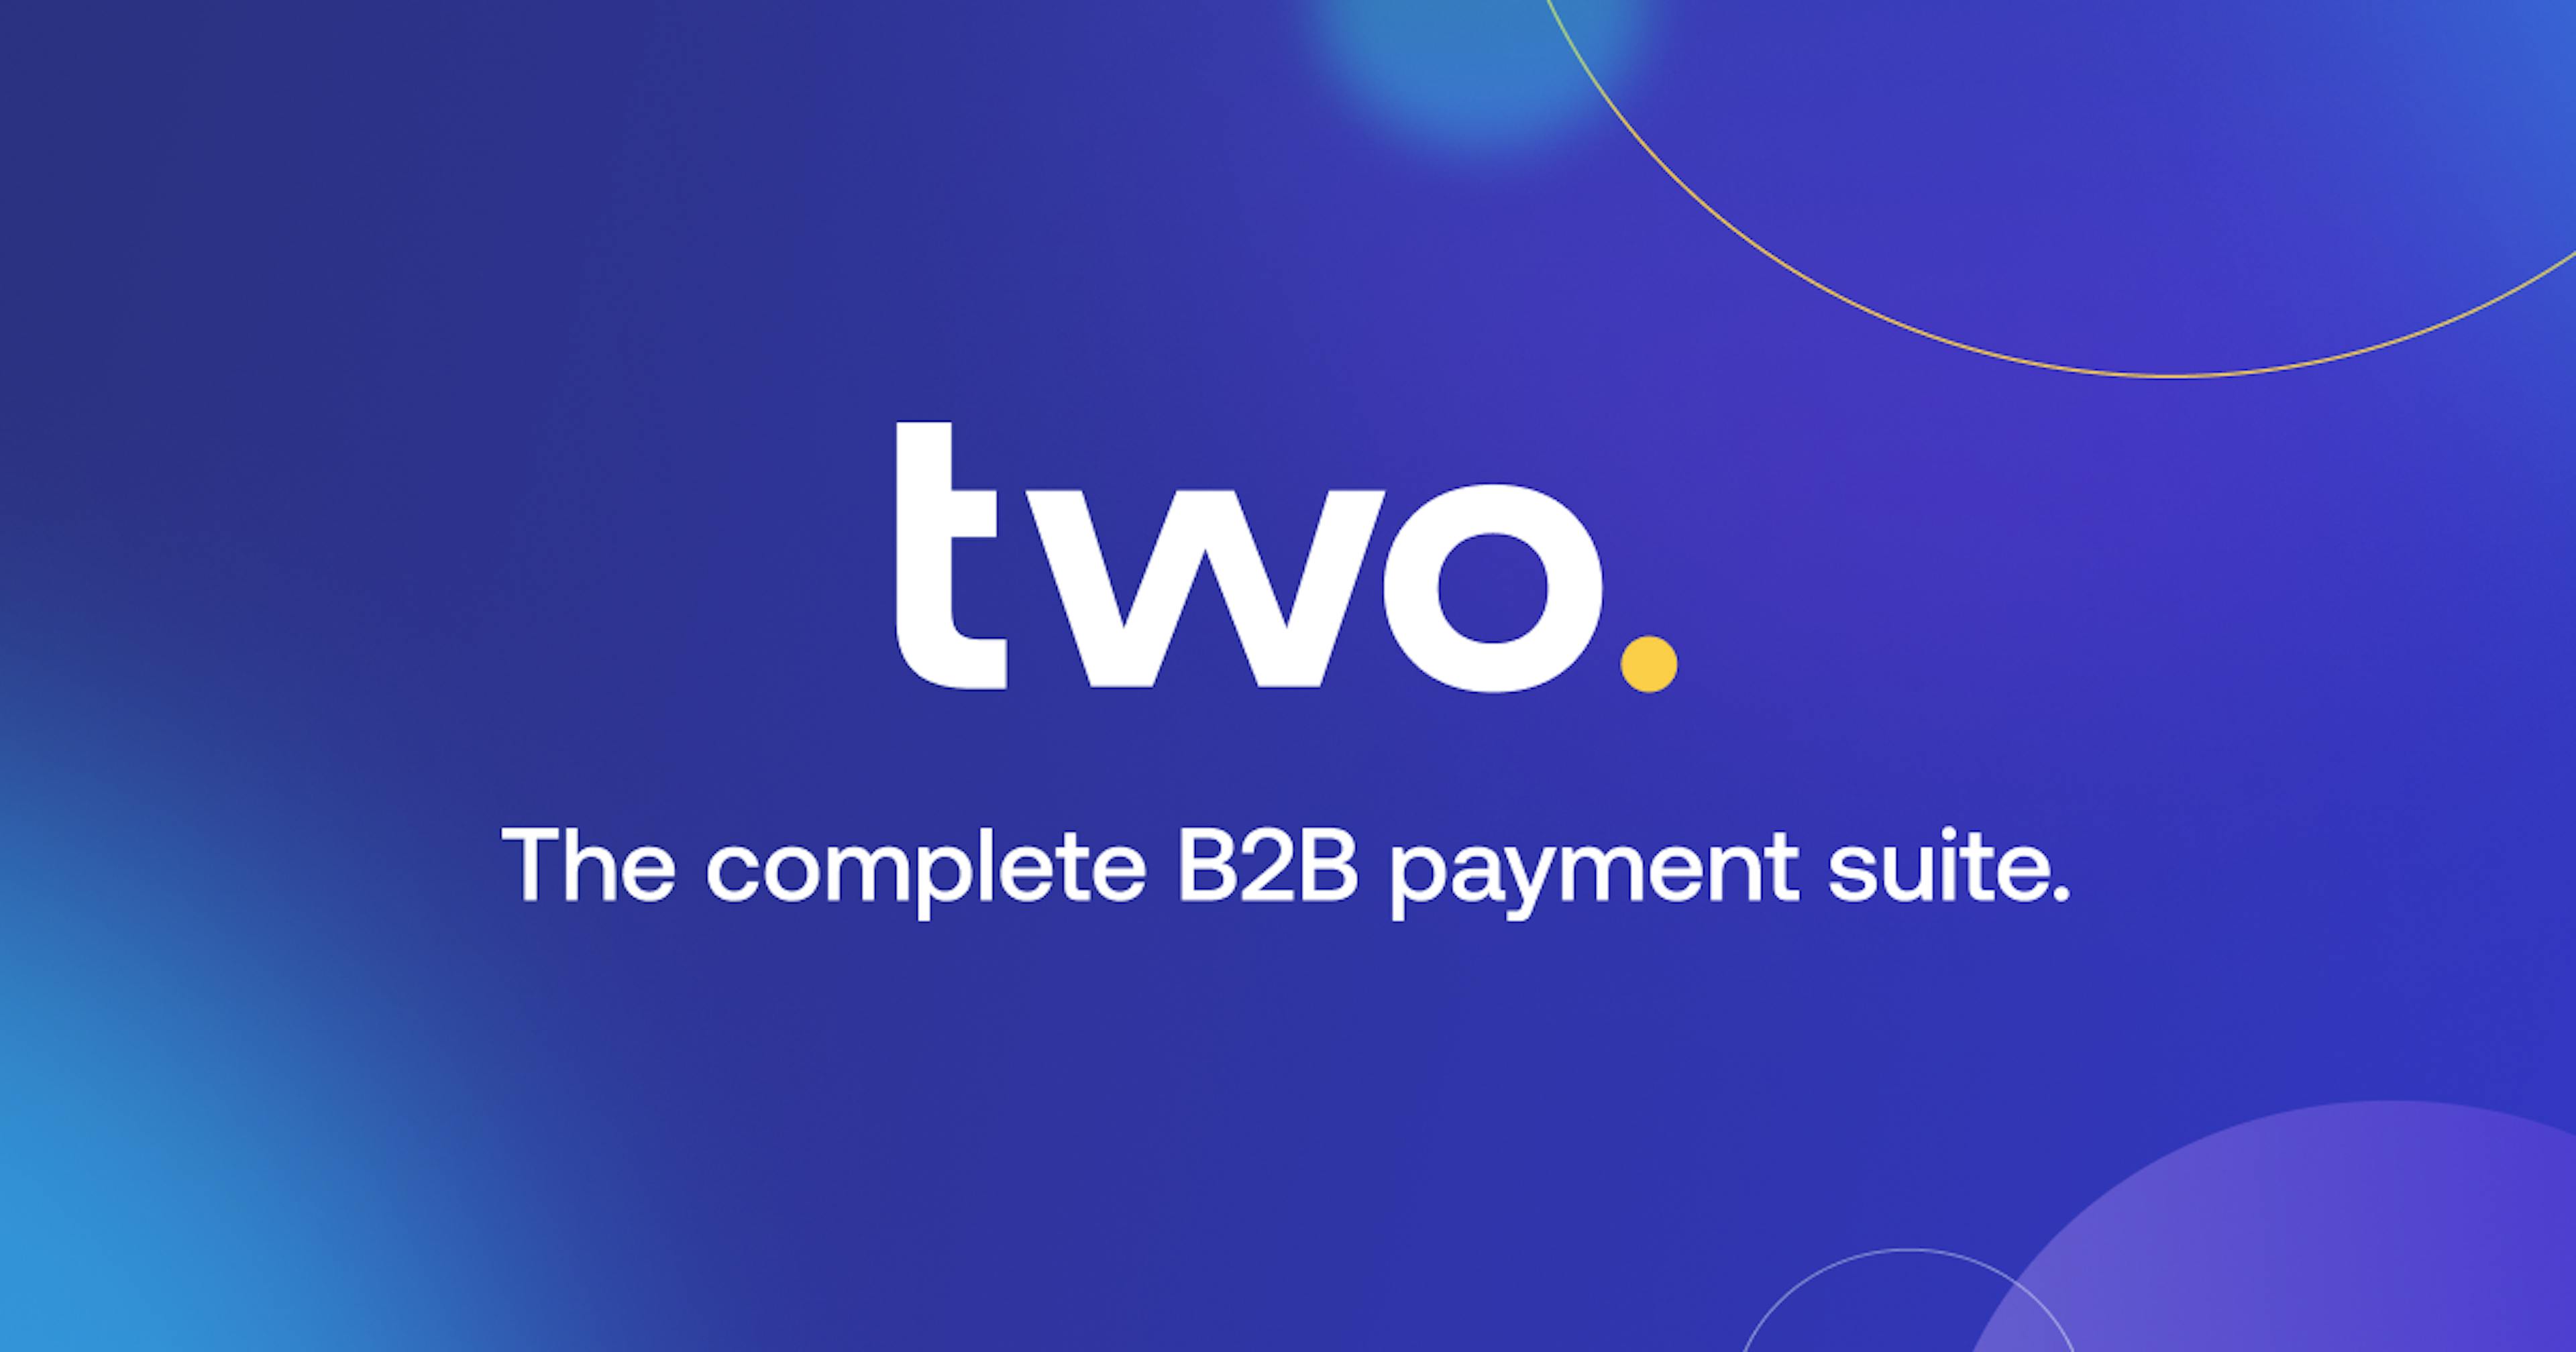 Bringing to Shopify their first BNPL B2B Payment Gateway: Late February - Two Inc Partnership